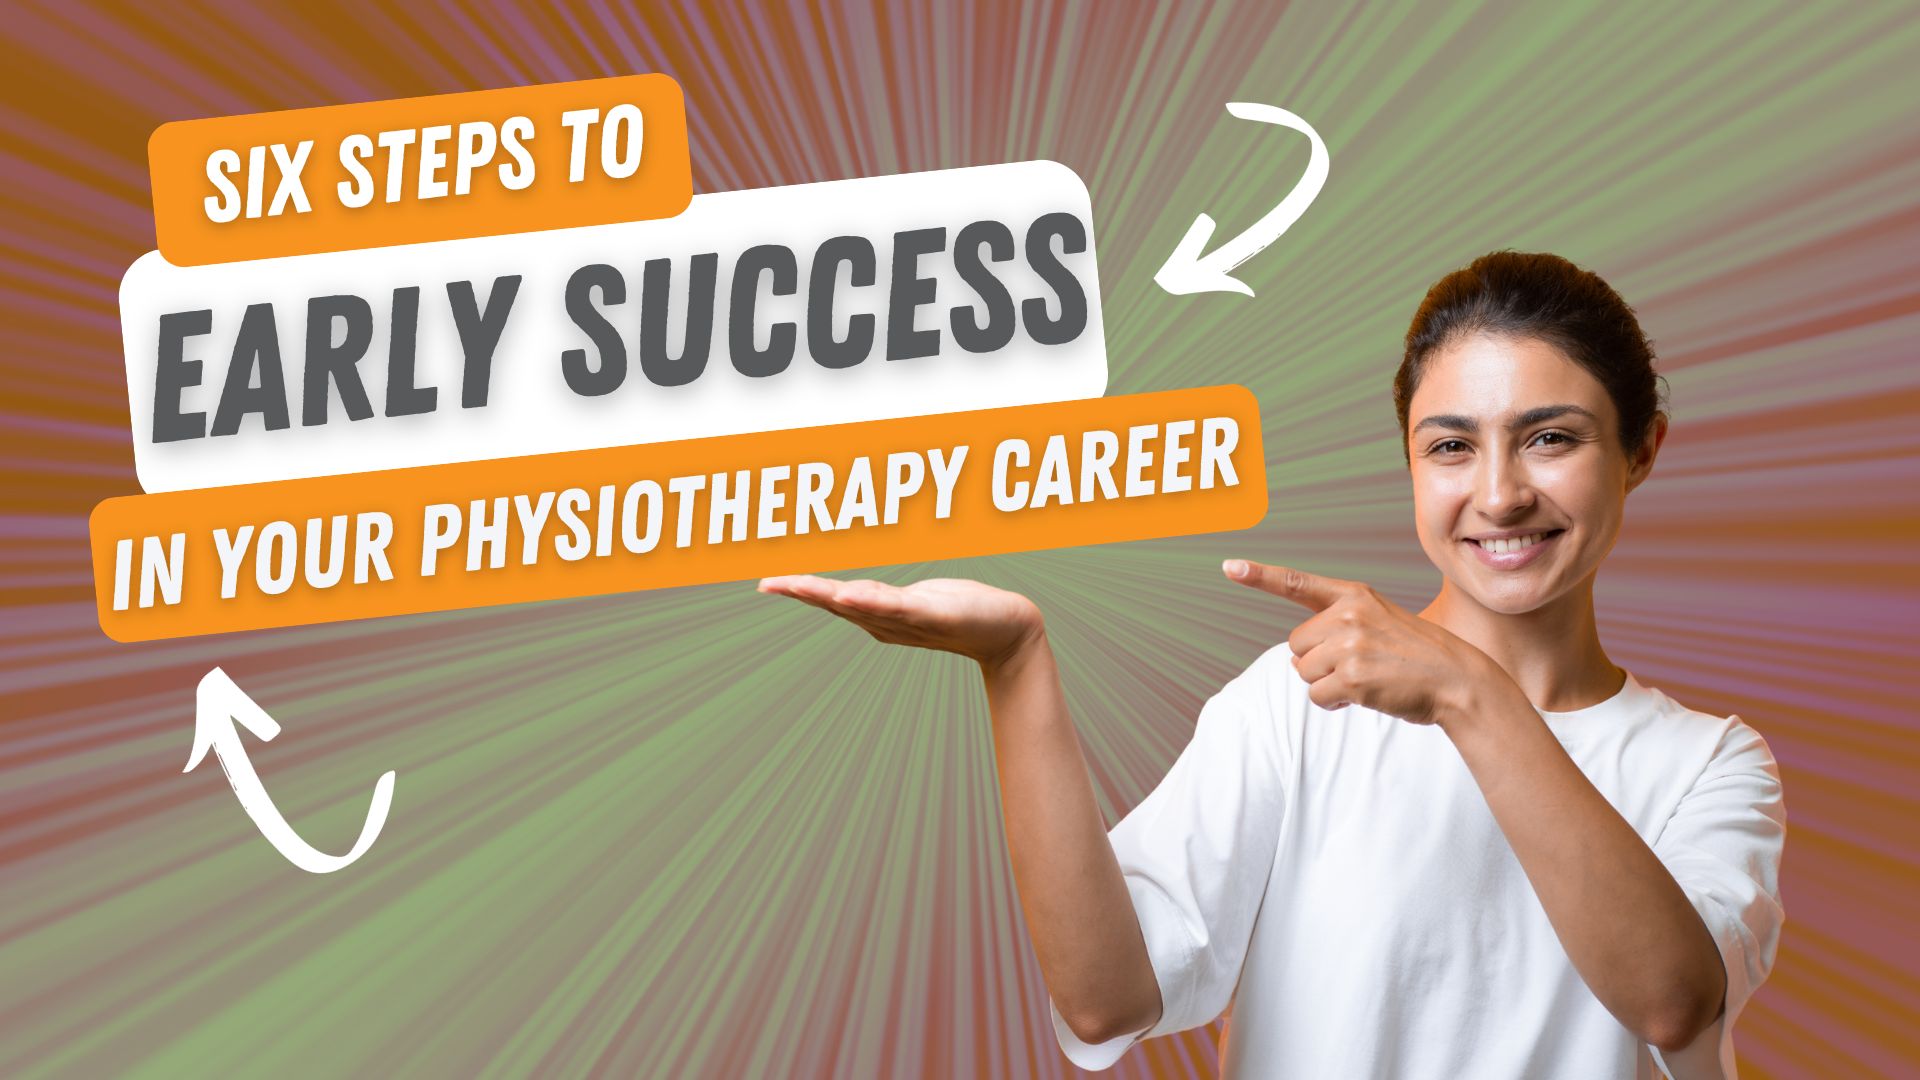 Six steps to early success in your physiotherapy career. Propel Physiotherapy.